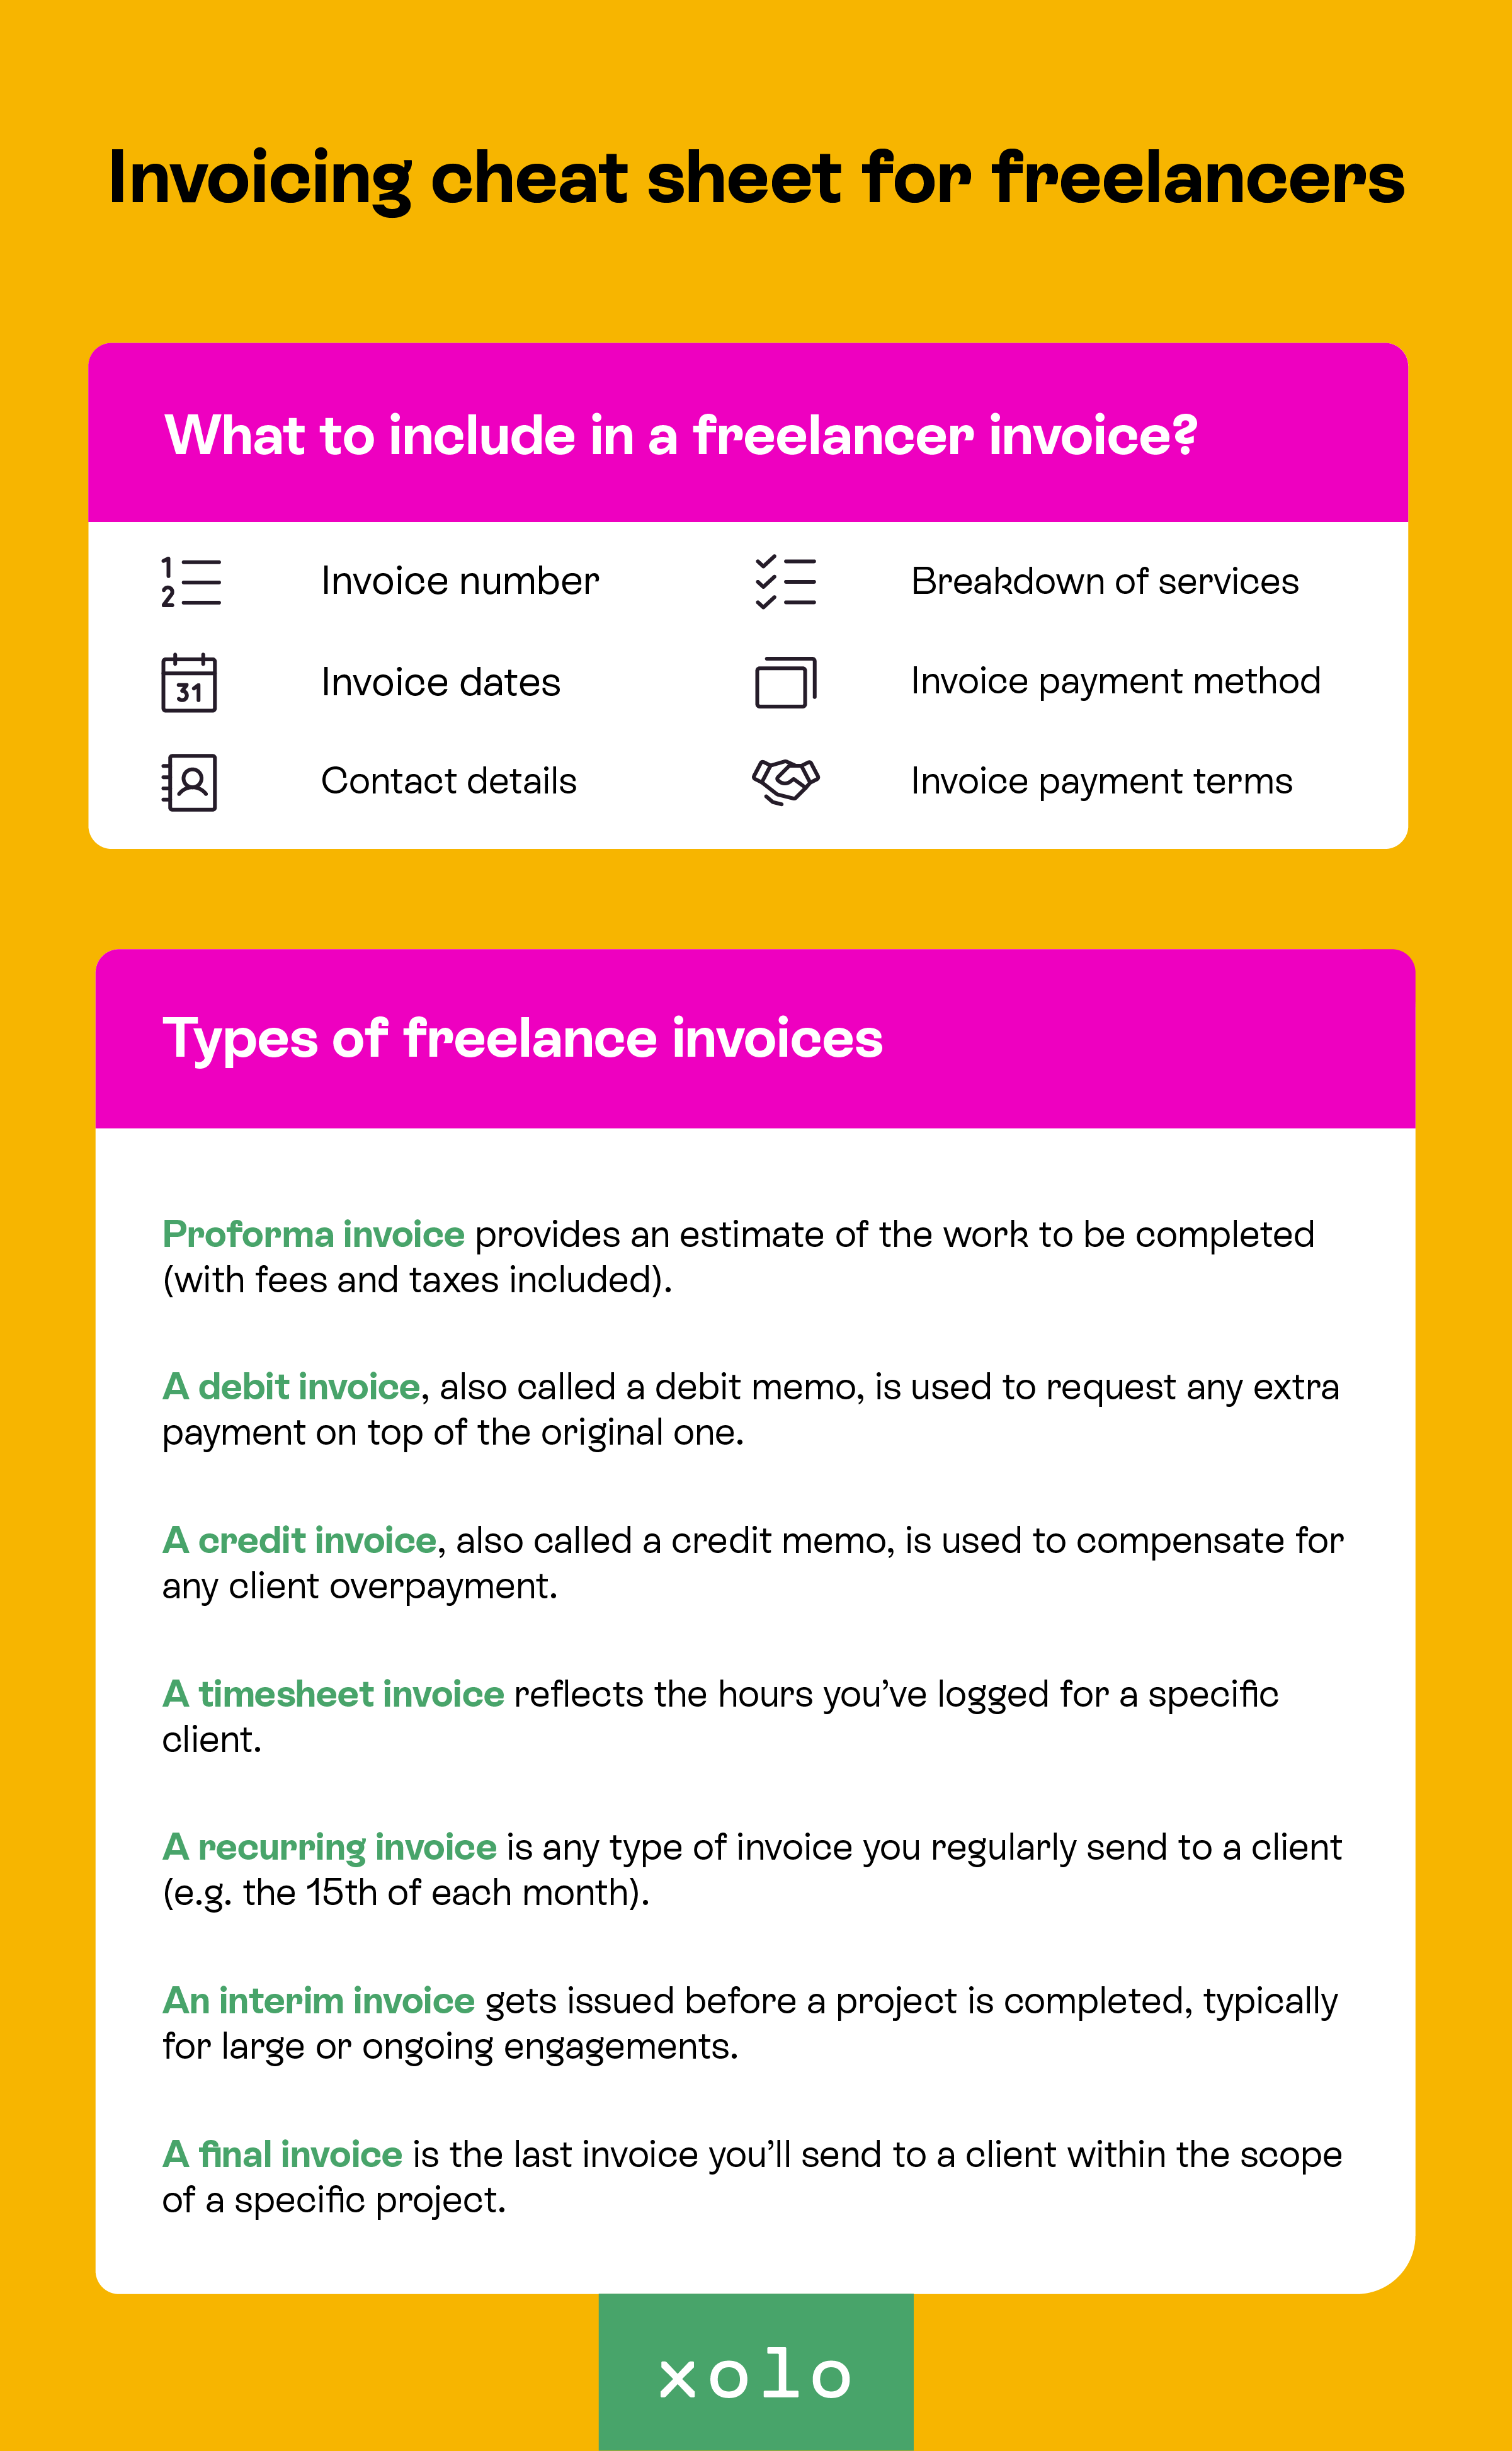 Invoicing cheat sheet for freelancers